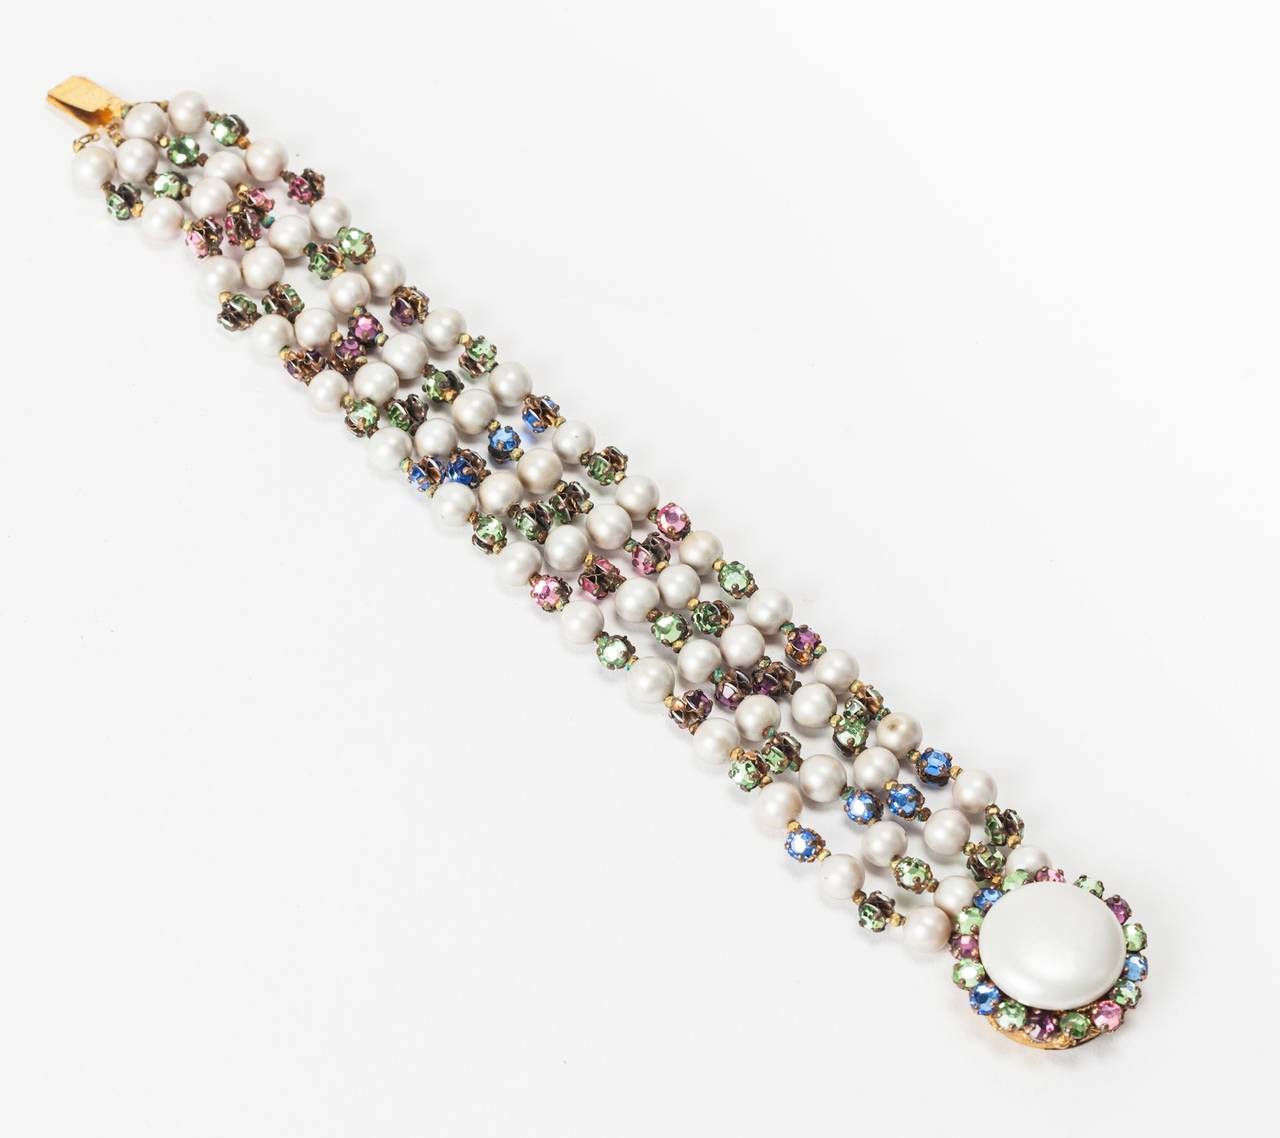 Lovely Miriam Haskell four strand bracelet of signature freshwater faux pearls and hand sewn multi pastel colored rose monte crystals spacers. Round button pearl clasp edged in pastel rose montes. 1940's USA. Excellent condition.

L7.75